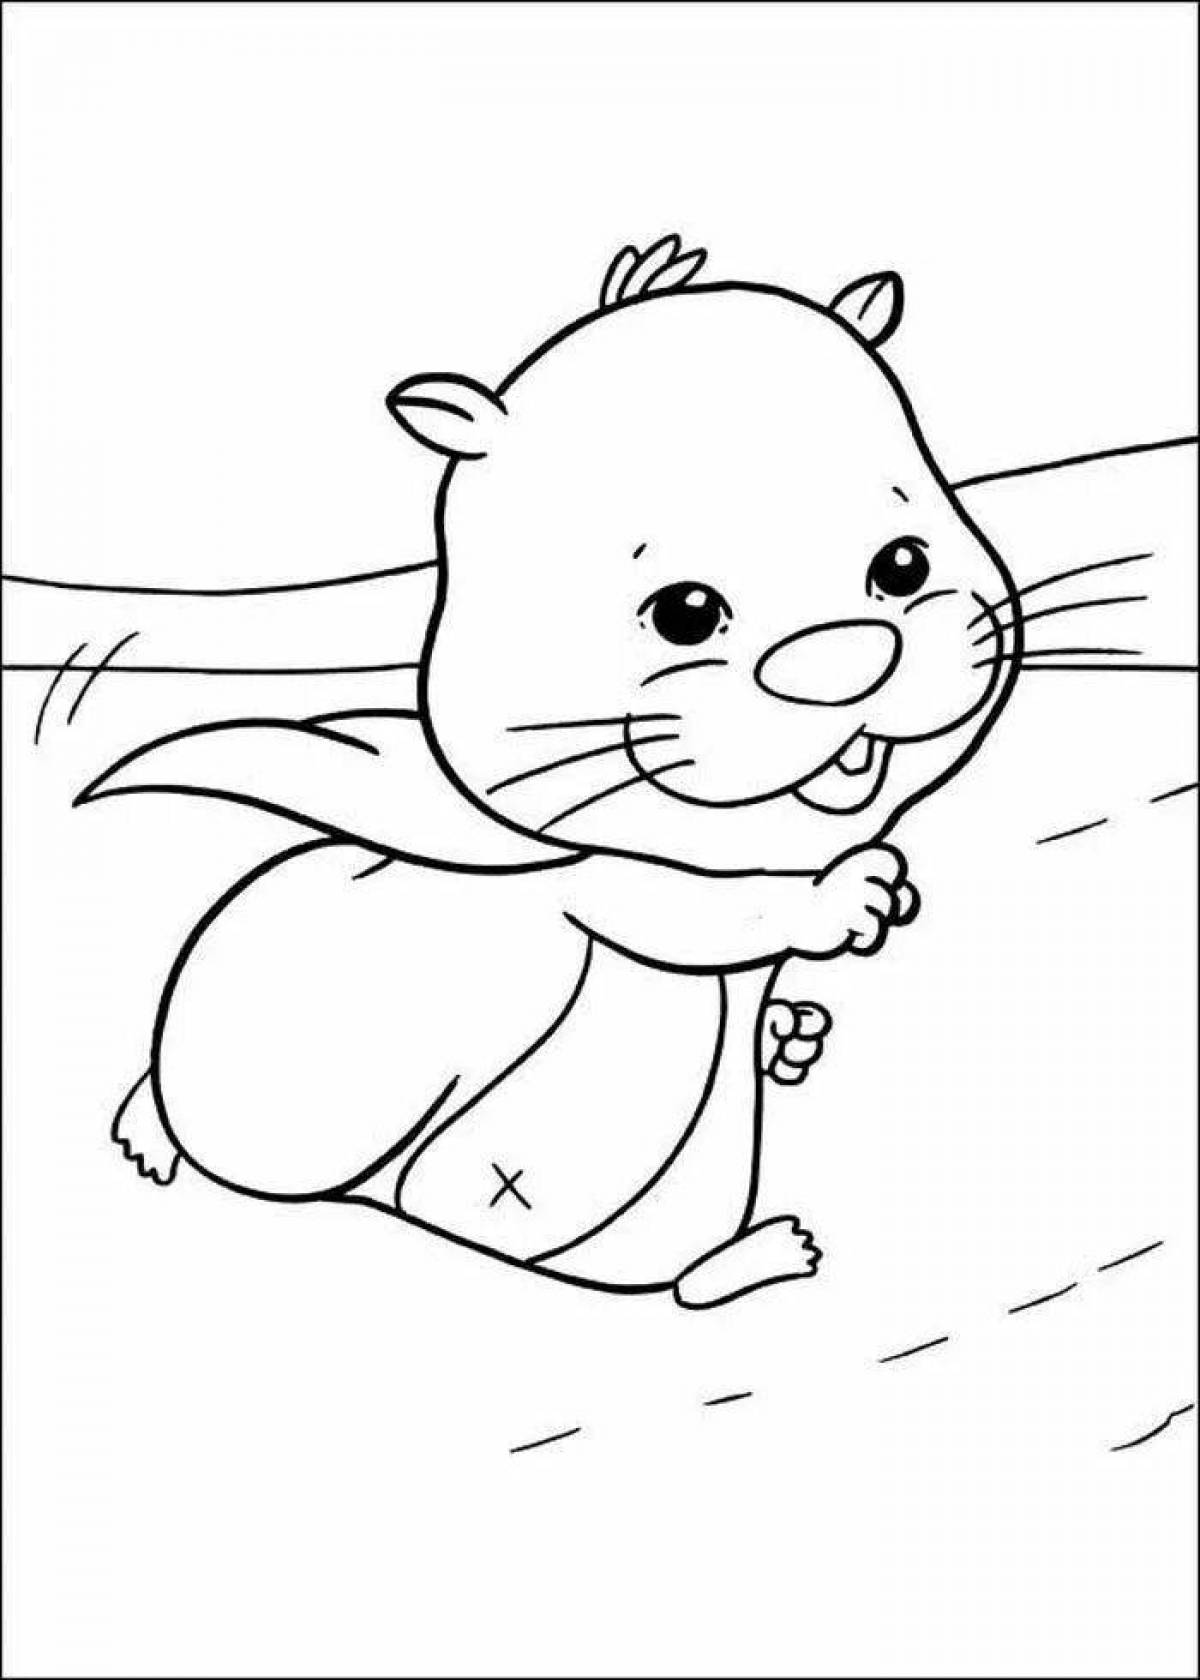 Amazing hamster coloring games